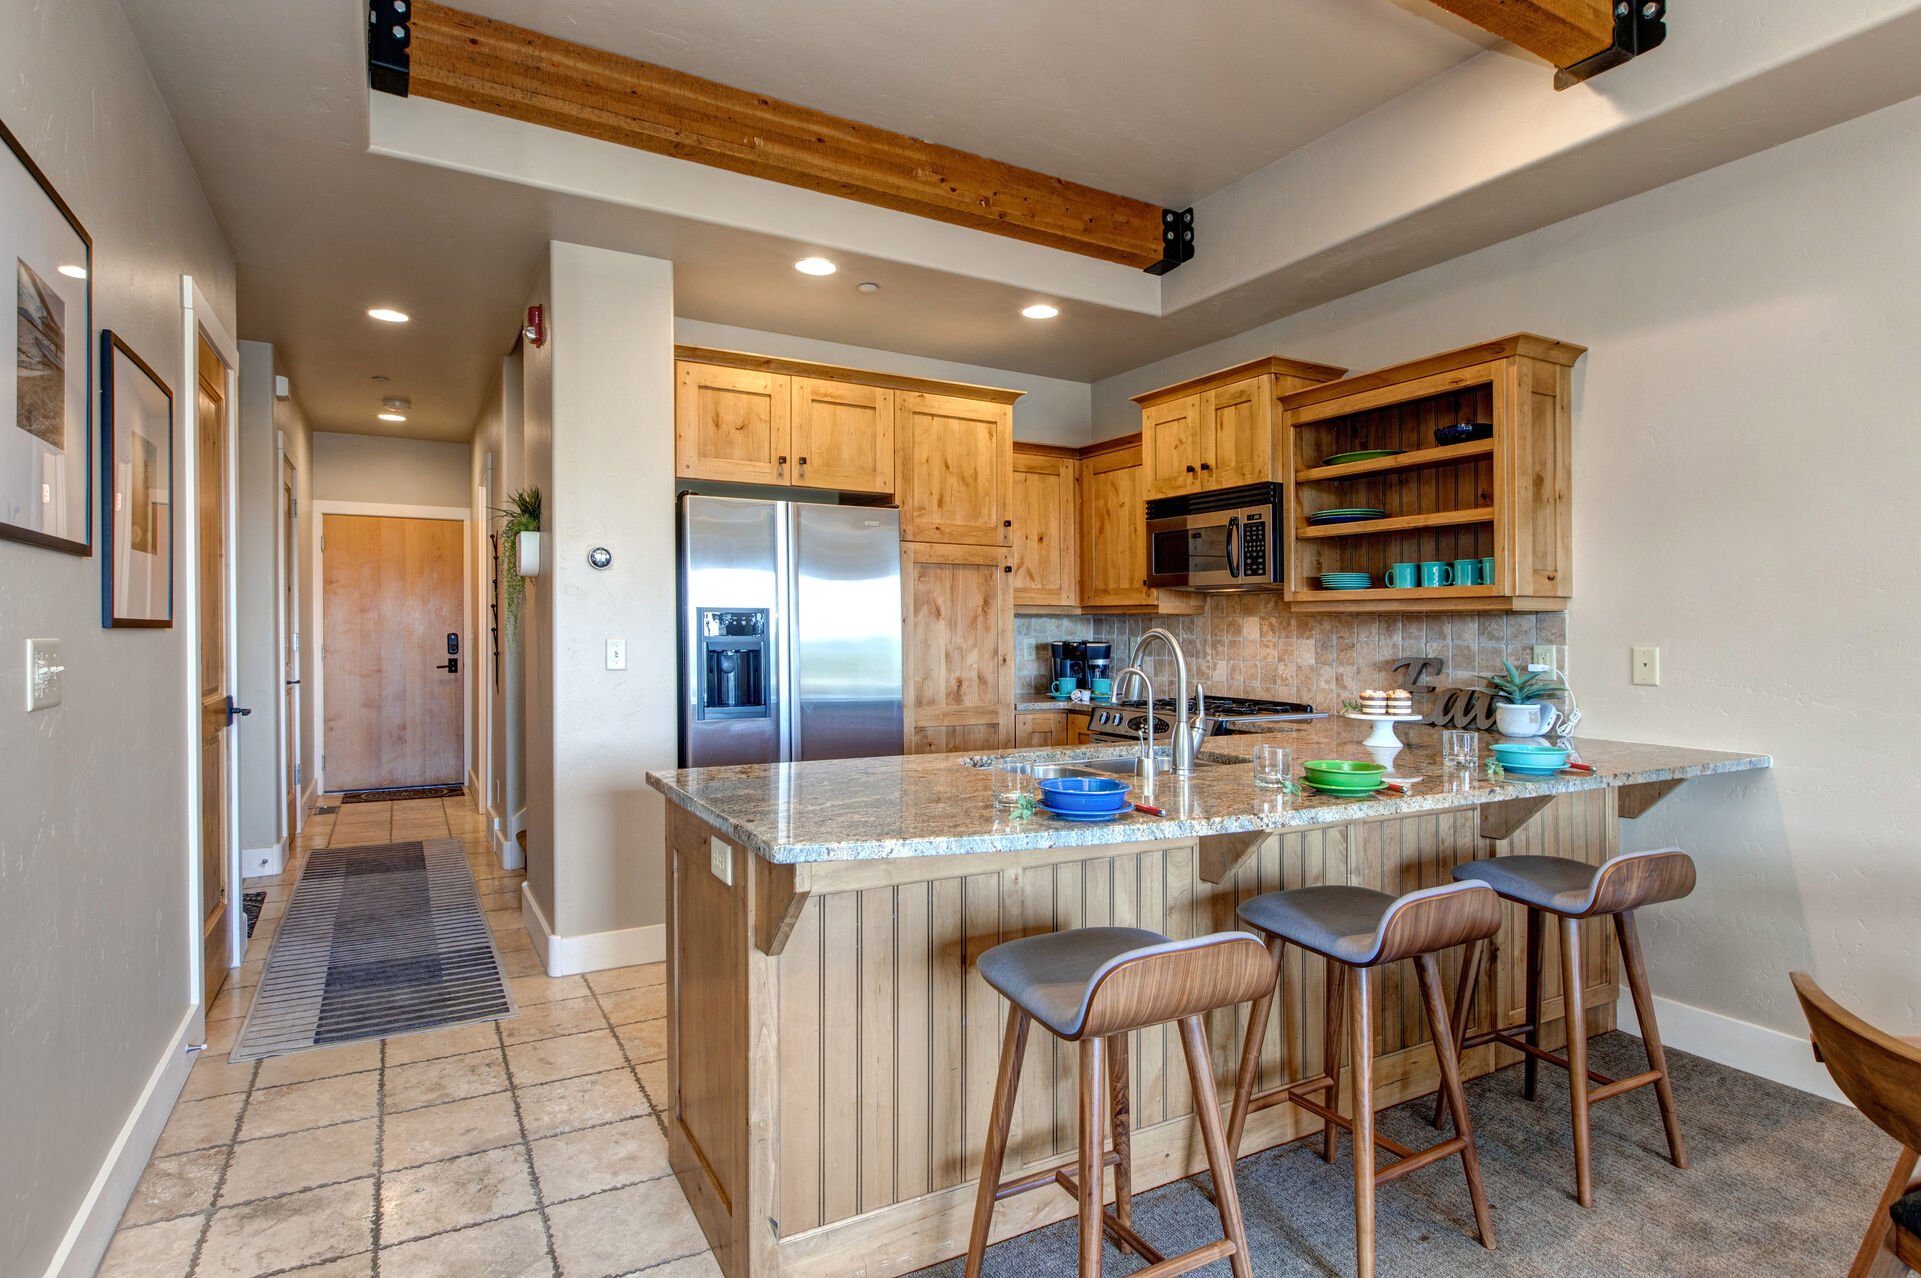 Fully Equipped Kitchen with stone countertops, stainless steel appliances, ice maker, and bar seating for three